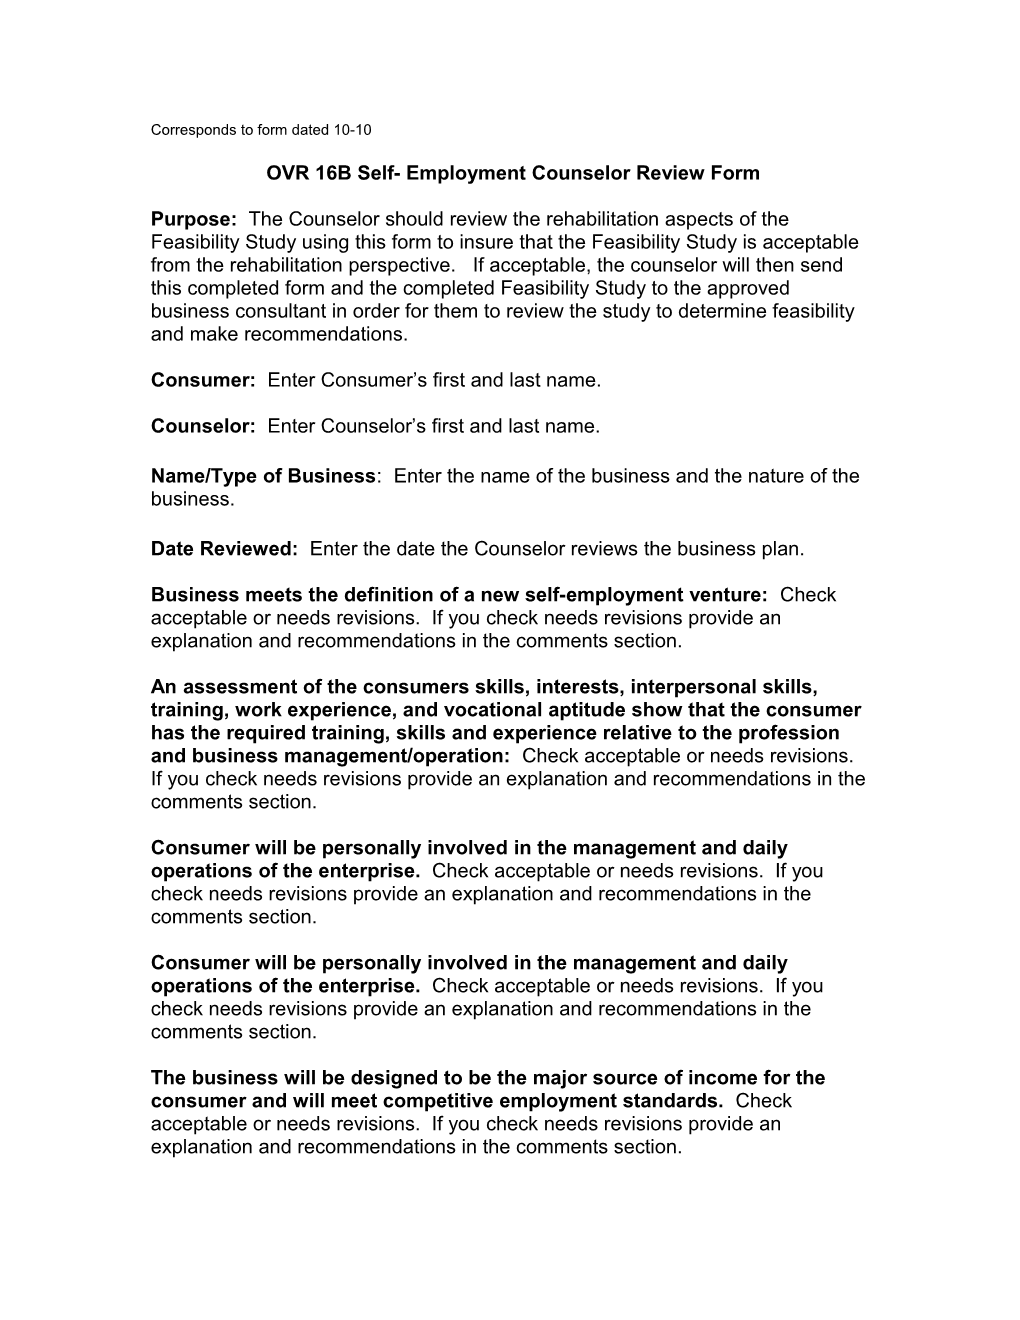 OVR 16B Self- Employment Counselor Review Form